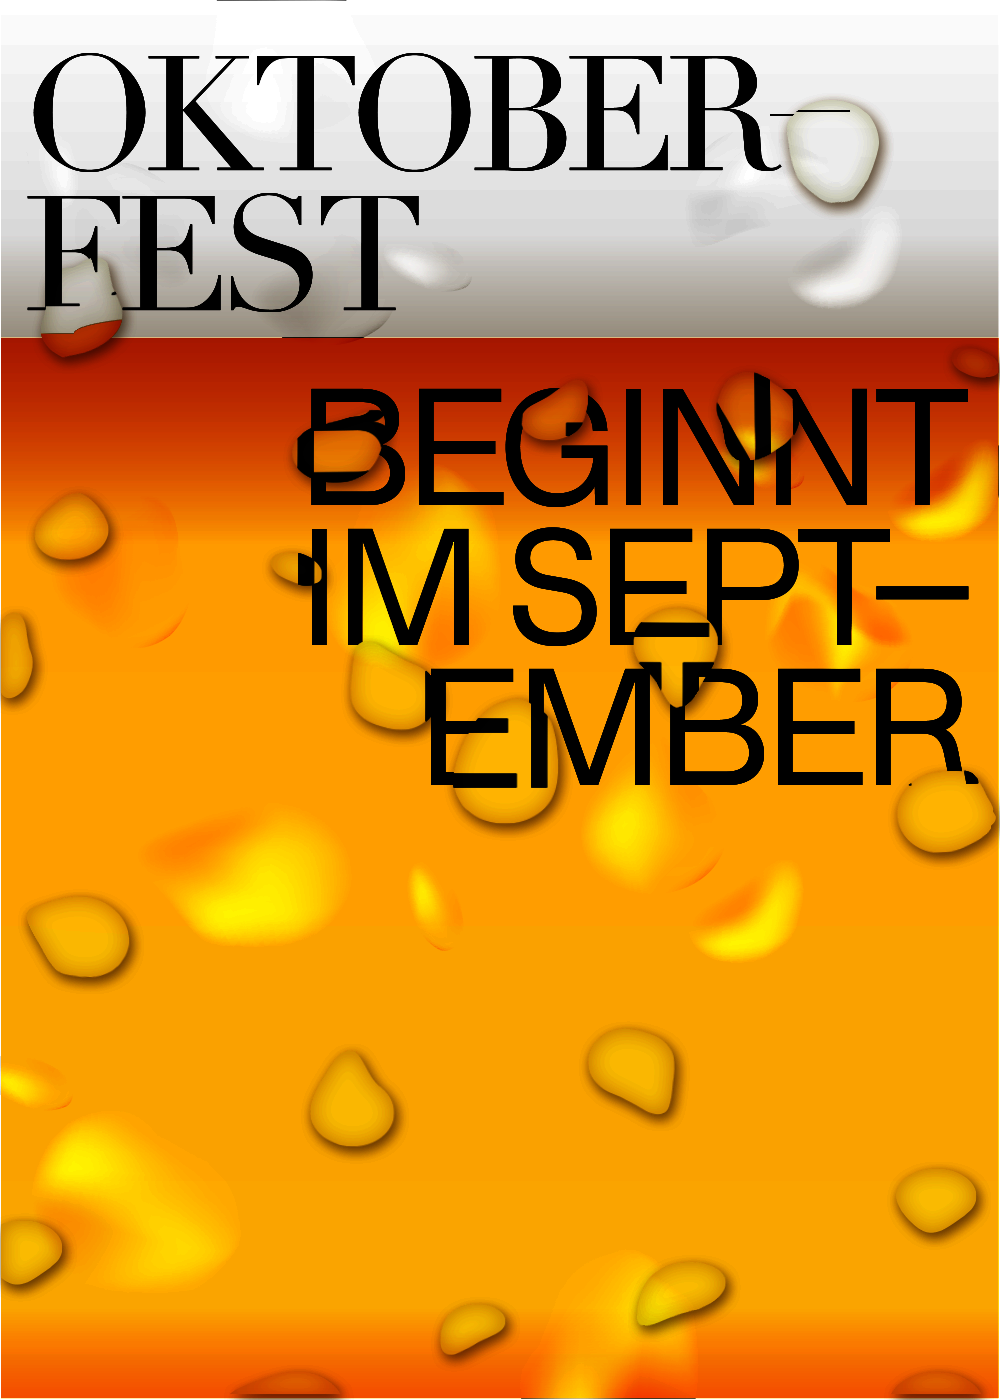 A poster about Oktoberfest with an illustration of beer